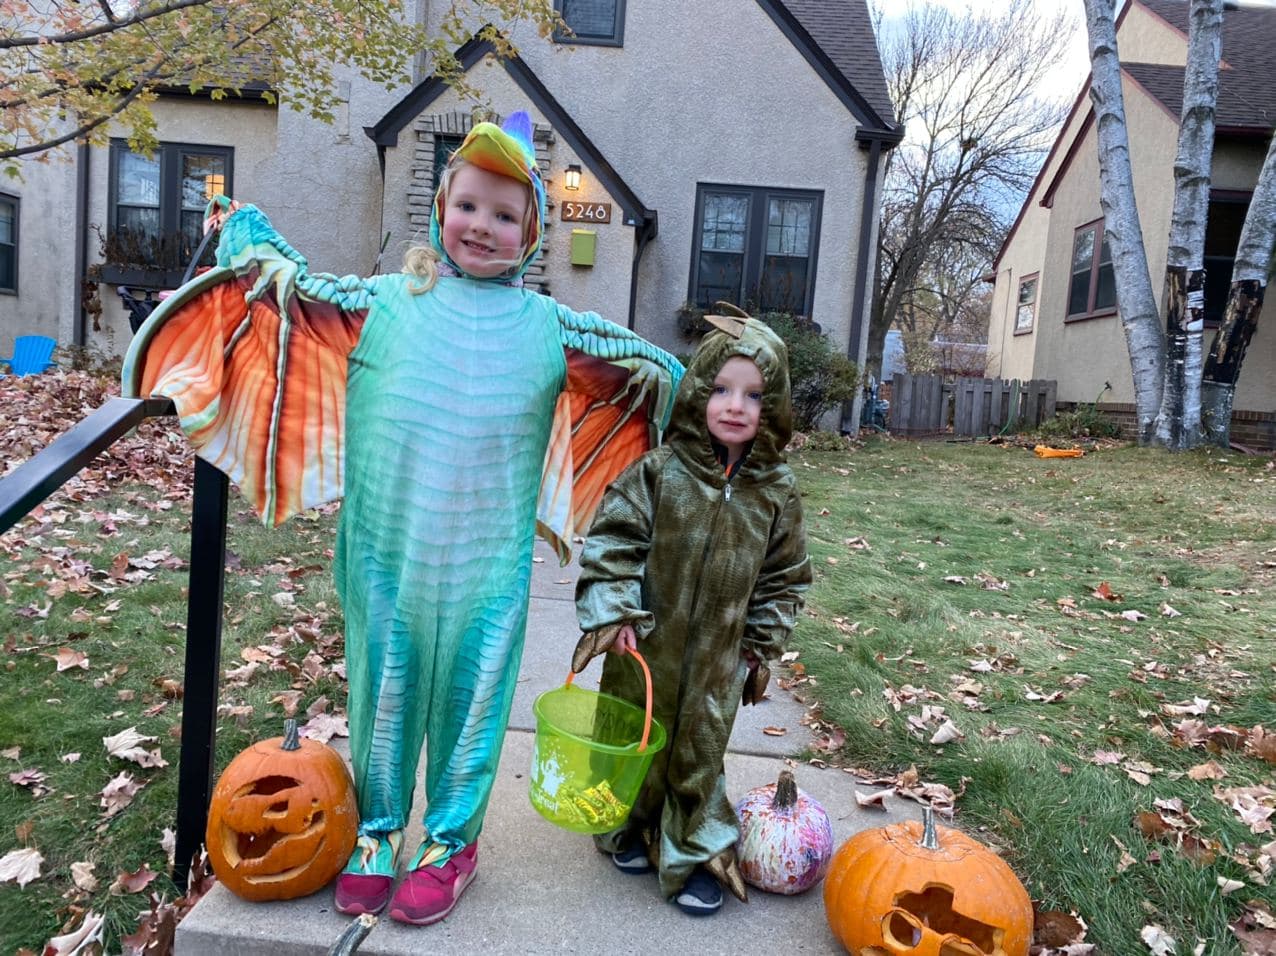 Two things trending in 2020: monster trucks (mostly Brennan) and dinosaurs (mostly Imogene). Fitting costume choices for Halloween.